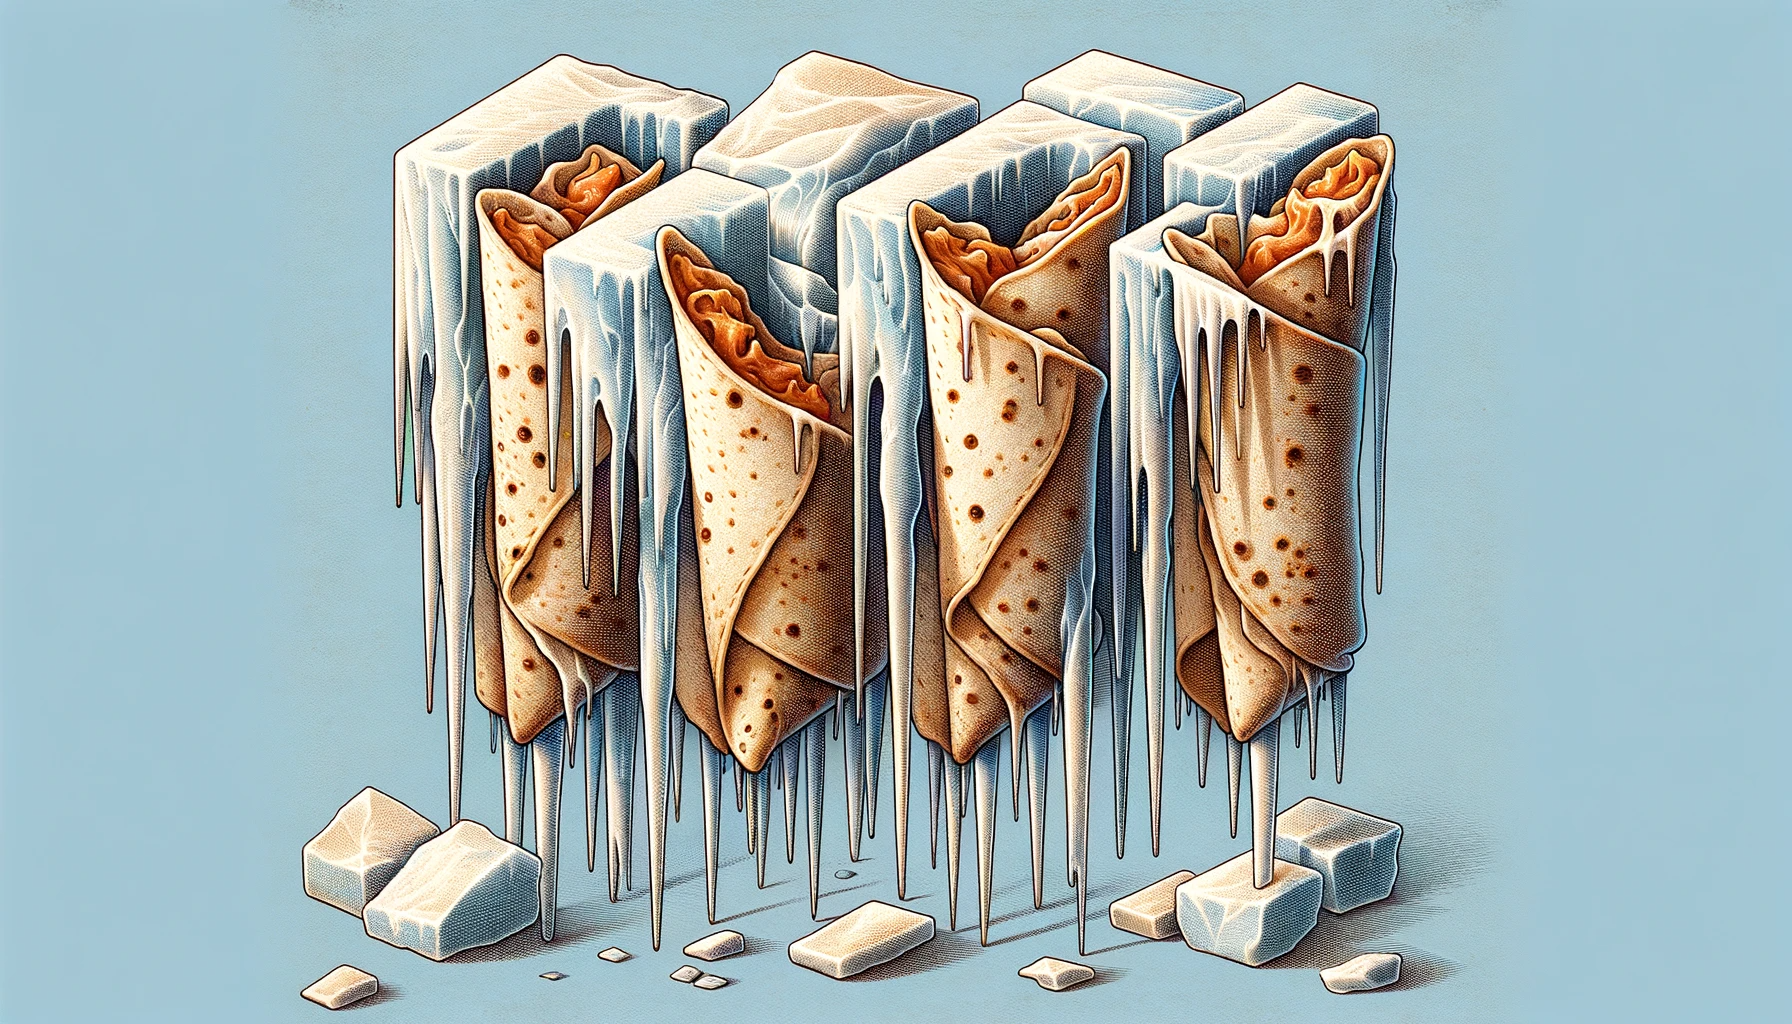 Frozen Enchiladas With Icicles Hanging Off Set On A Dark Blue Background